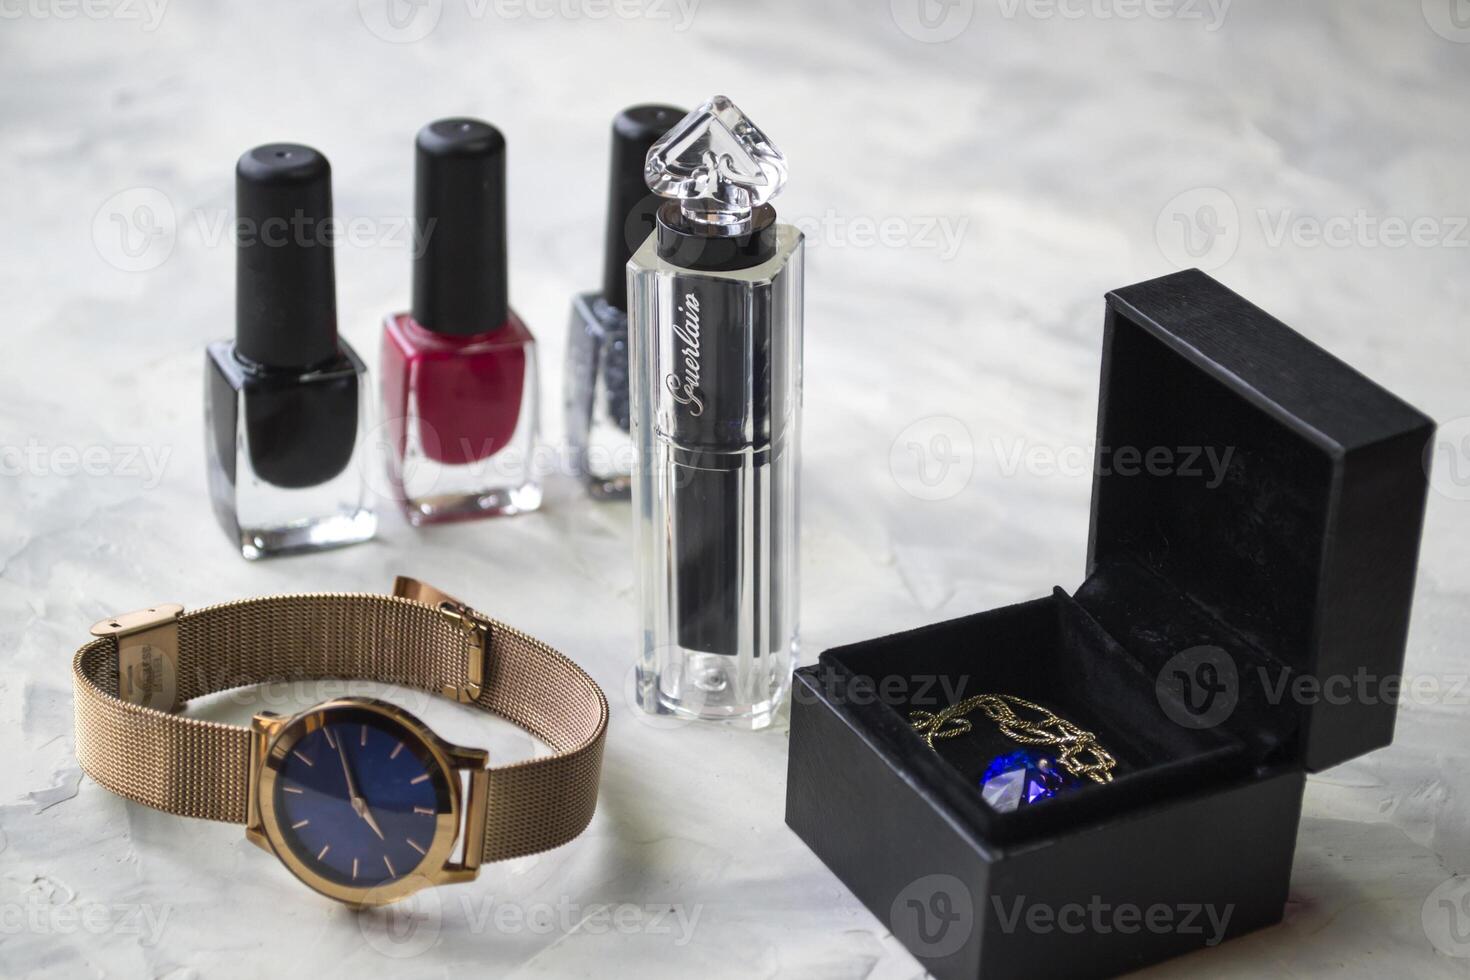 Wrist watch and female accessories on the table. photo